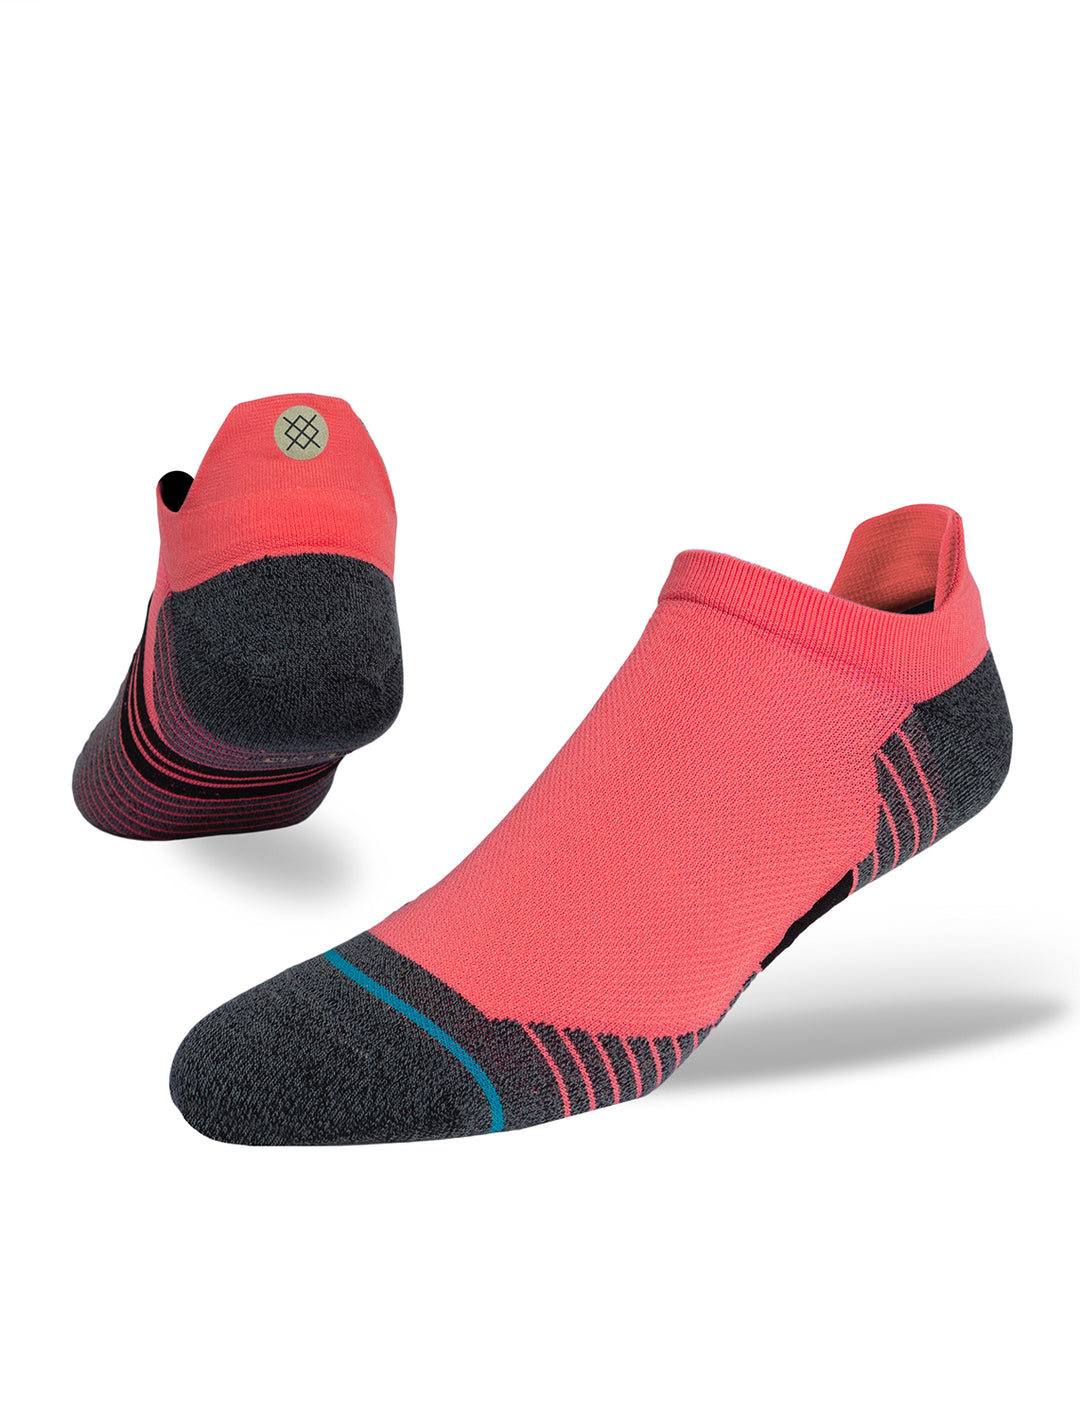 Stance's ultra tab running socks in neon pink on a foot form.